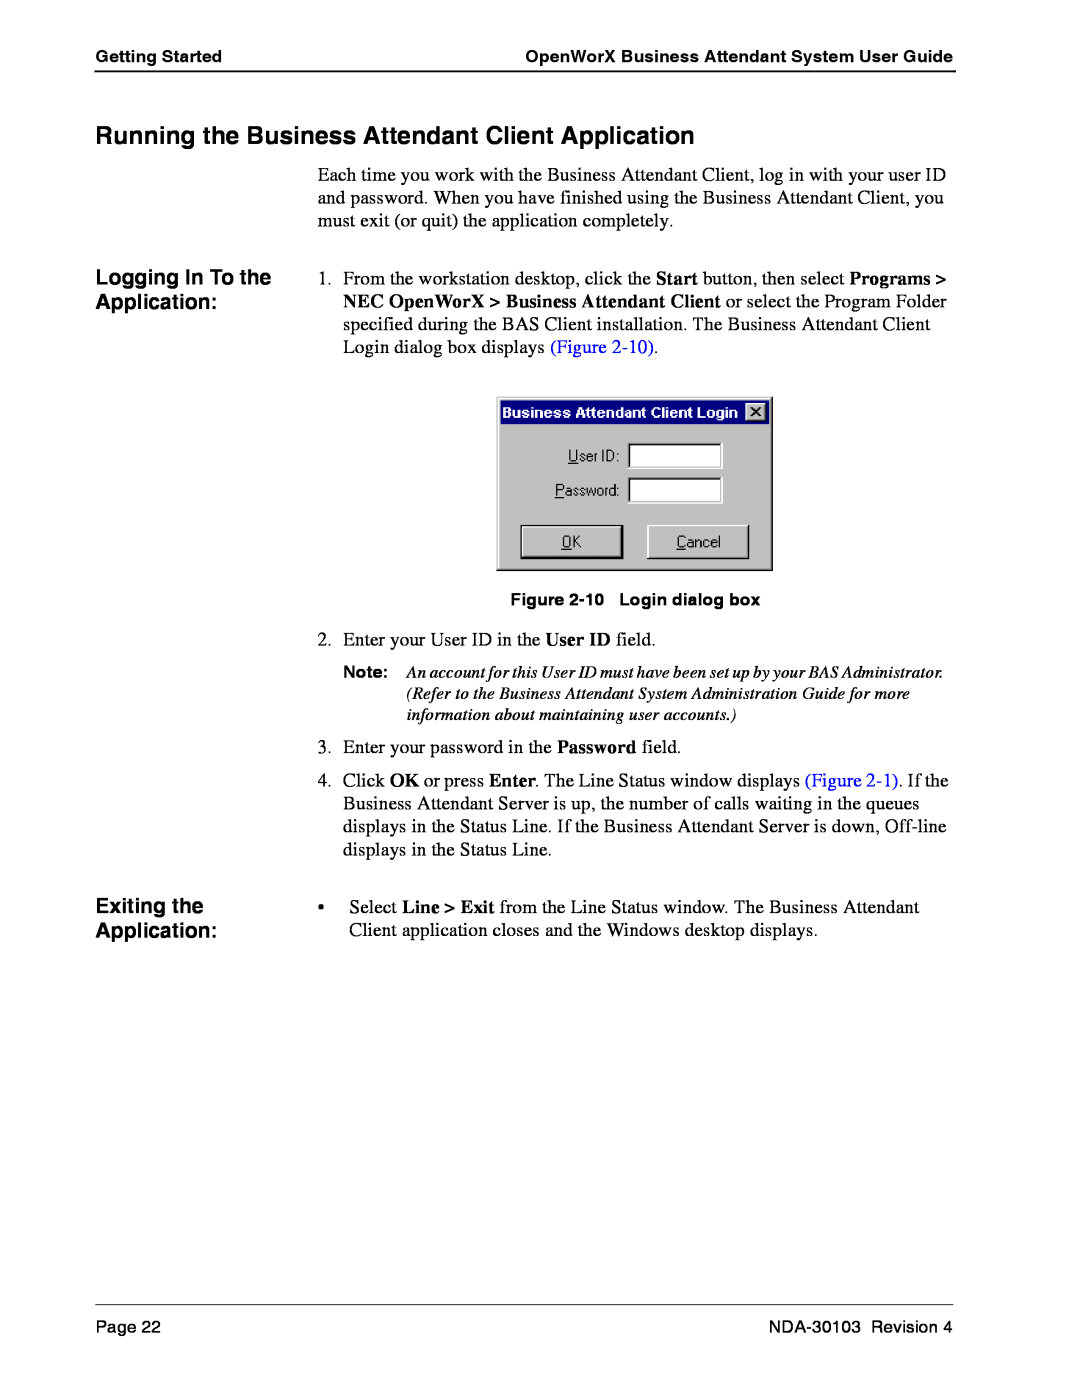 NEC NDA-30103-004 manual Running the Business Attendant Client Application, Exiting the 